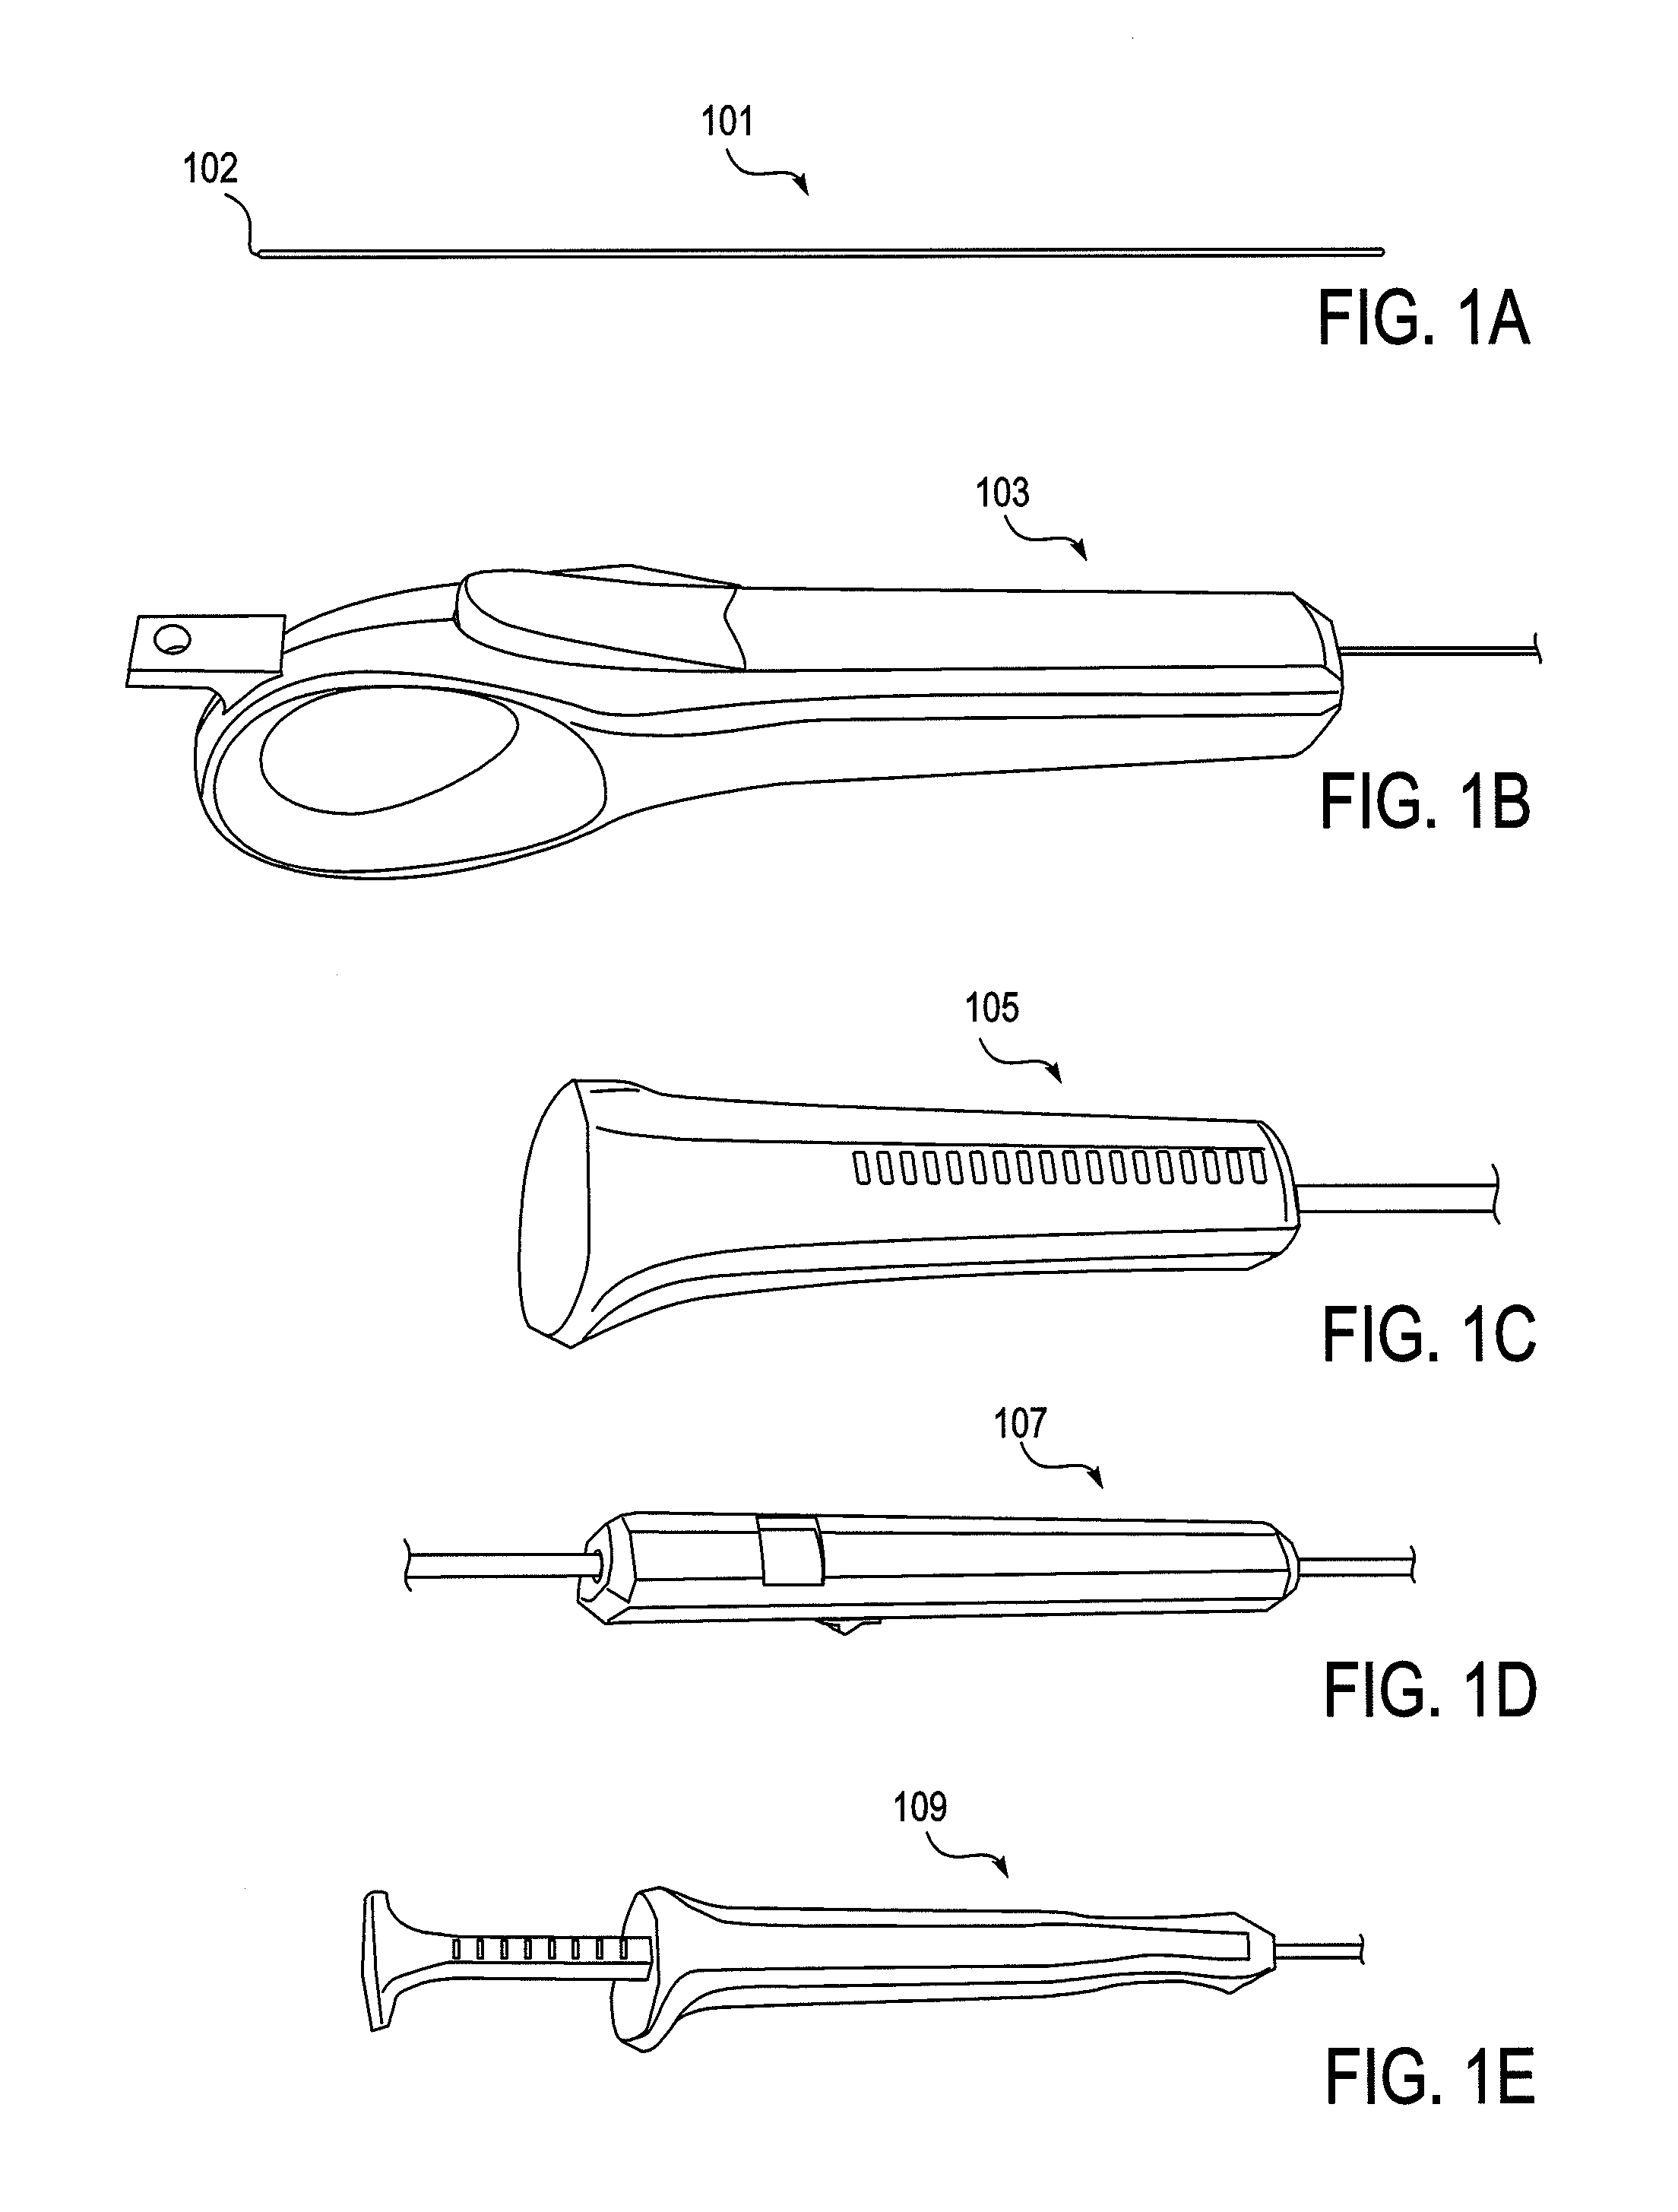 Surgical tools for treatment of spinal stenosis